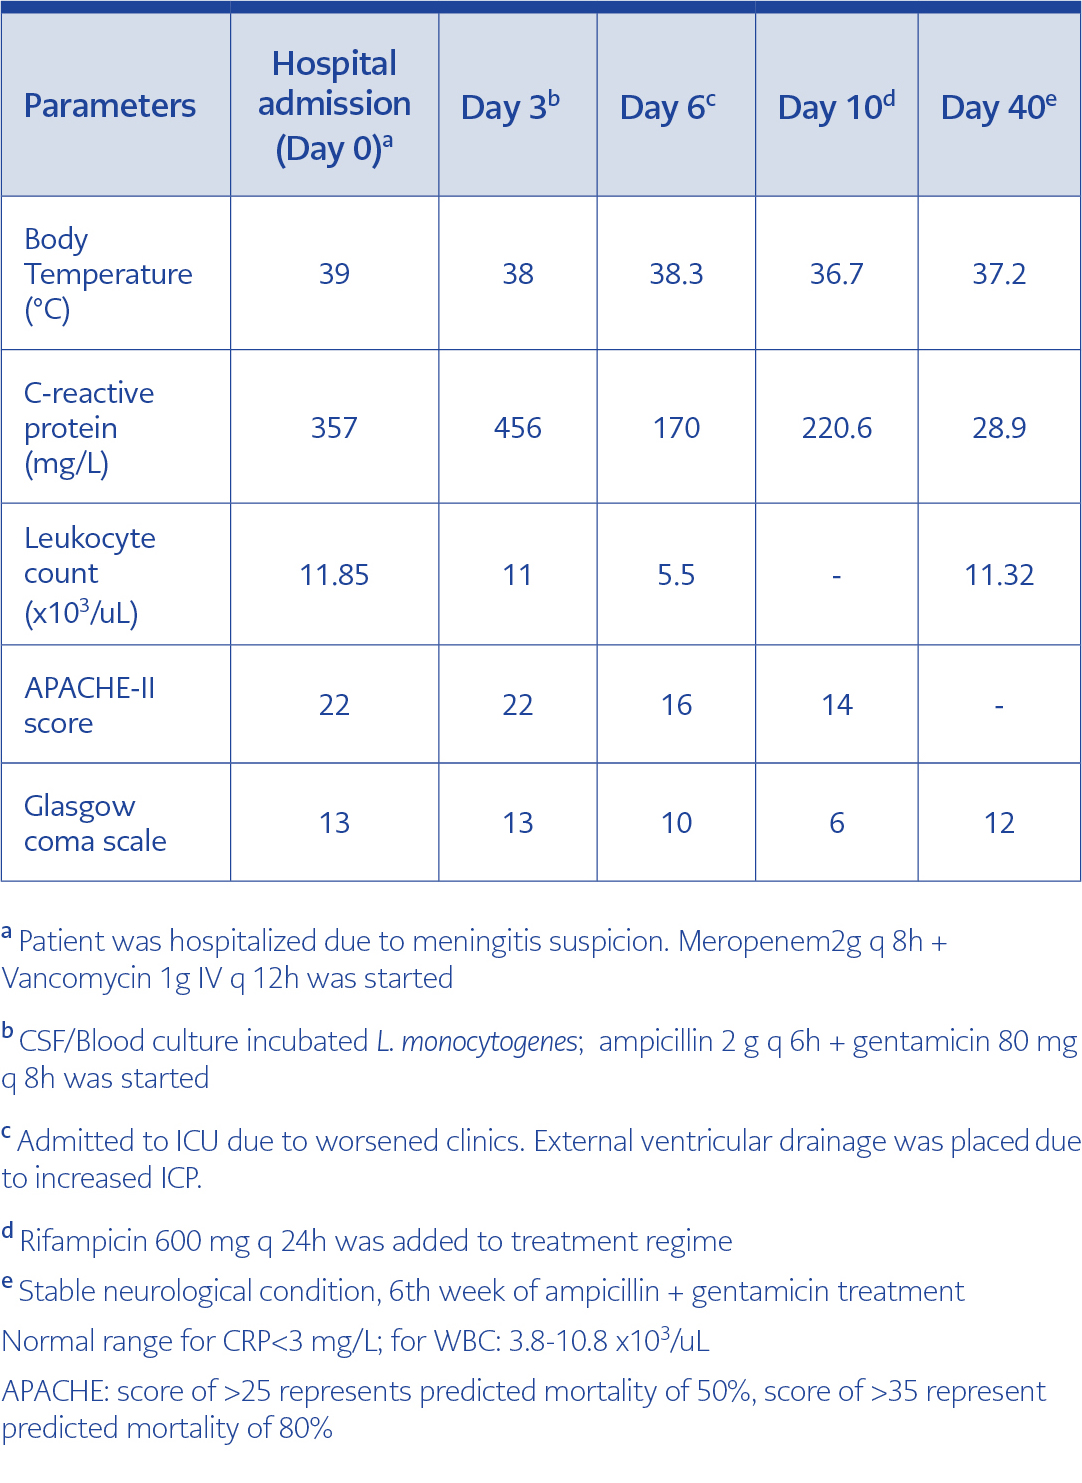 <strong>Table 1.</strong> Clinical parameters on the day of hospital admission and during follow-up